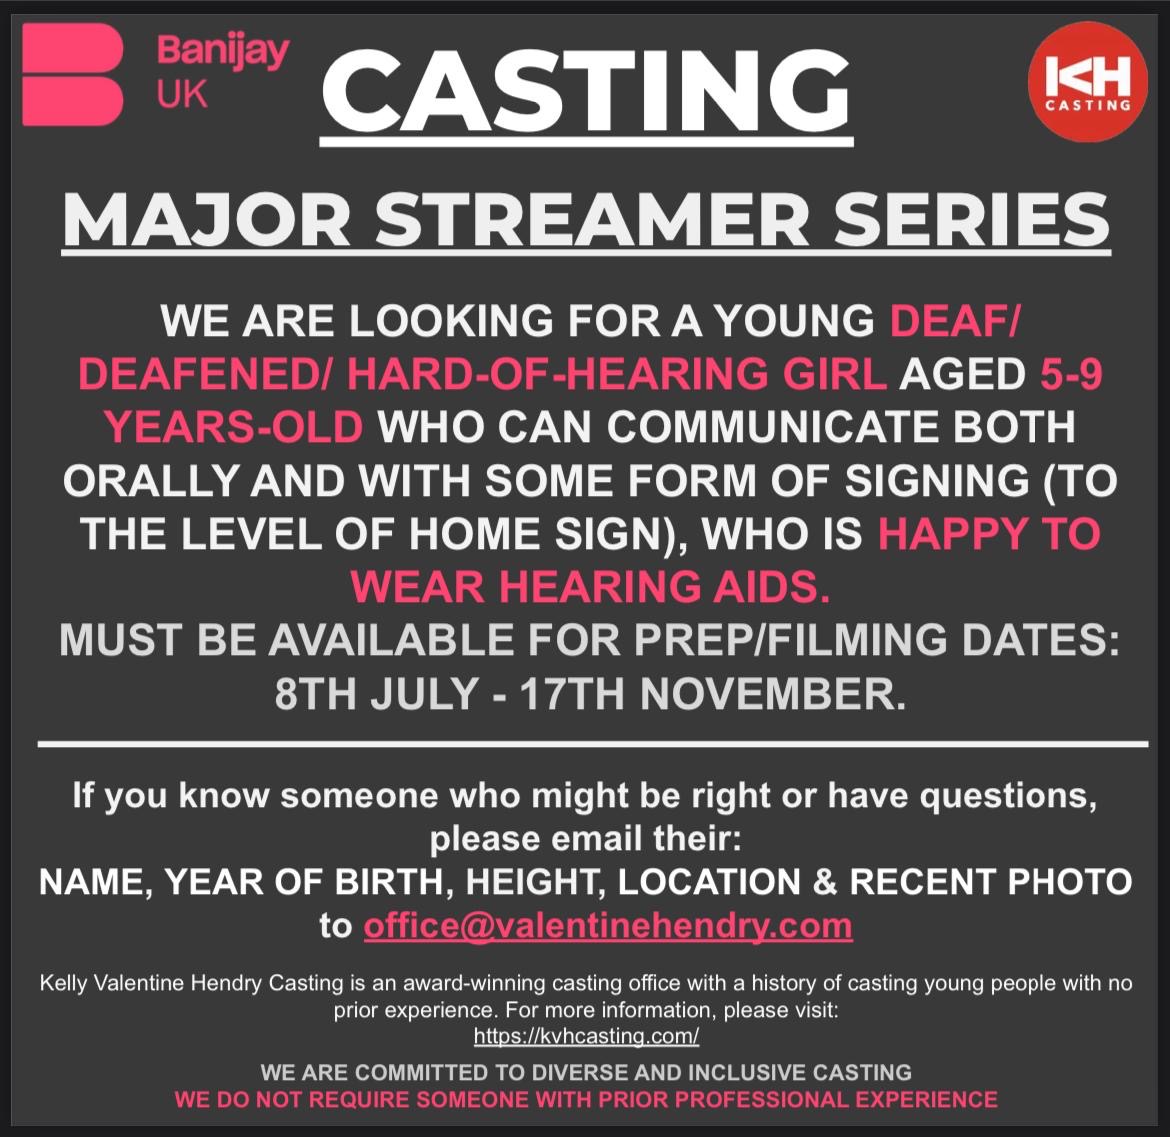 📢 💫 *CASTING CALL* KVH Casting are looking for girls who are deaf/deafened/hard-of-hearing for a new UK streamer series. Please share and get in touch if you know someone who might be interested.